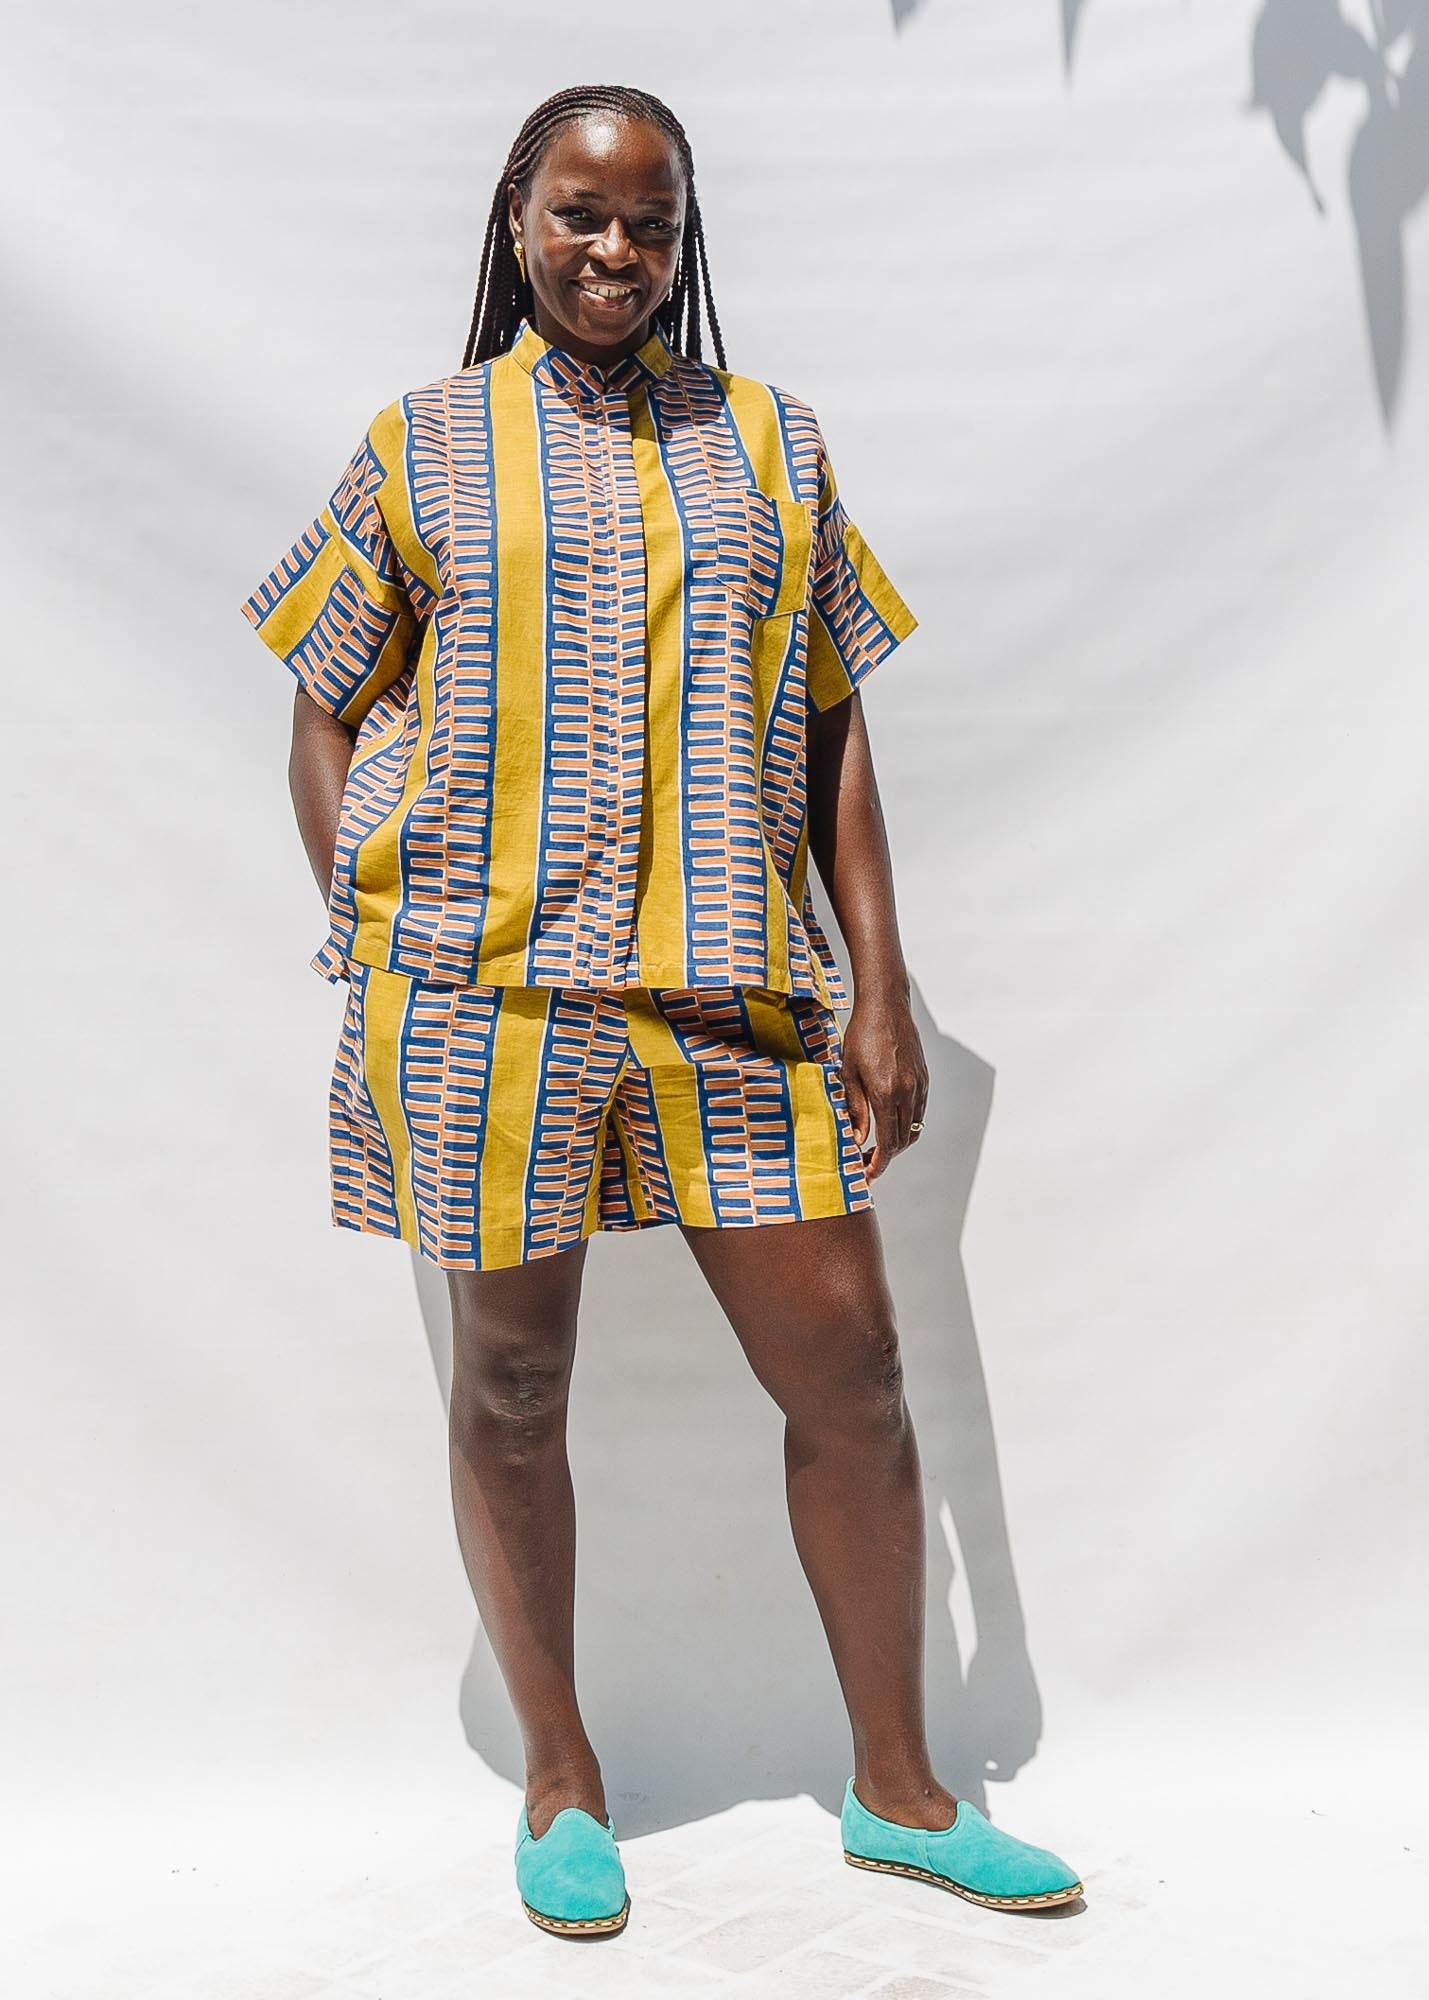 The model is wearing olive-yellow, blue, orange and white printed shorts